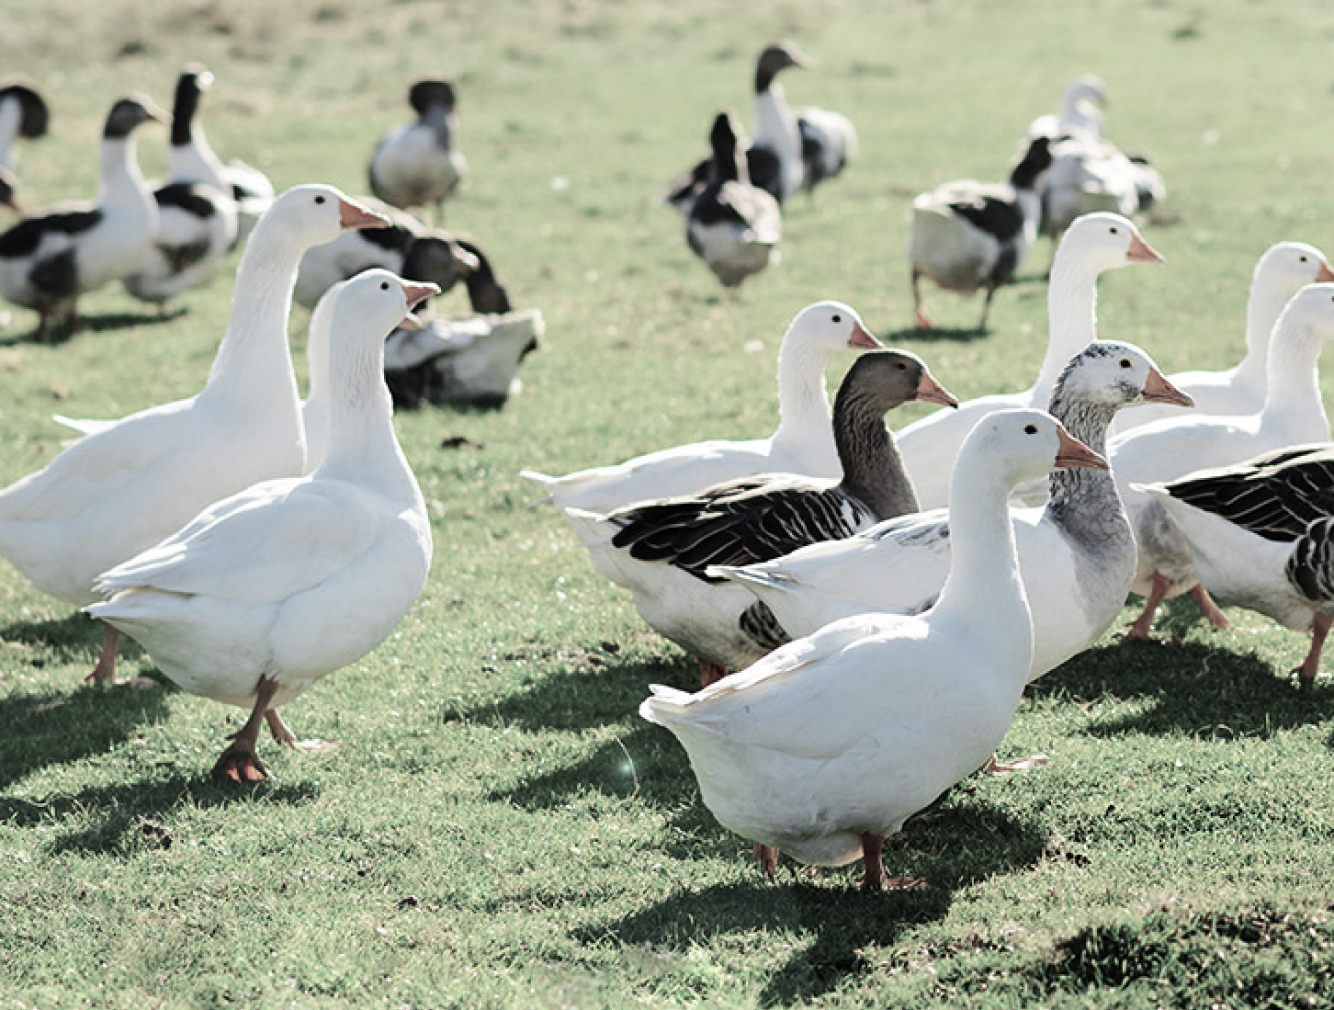 Image of a flock of geese.